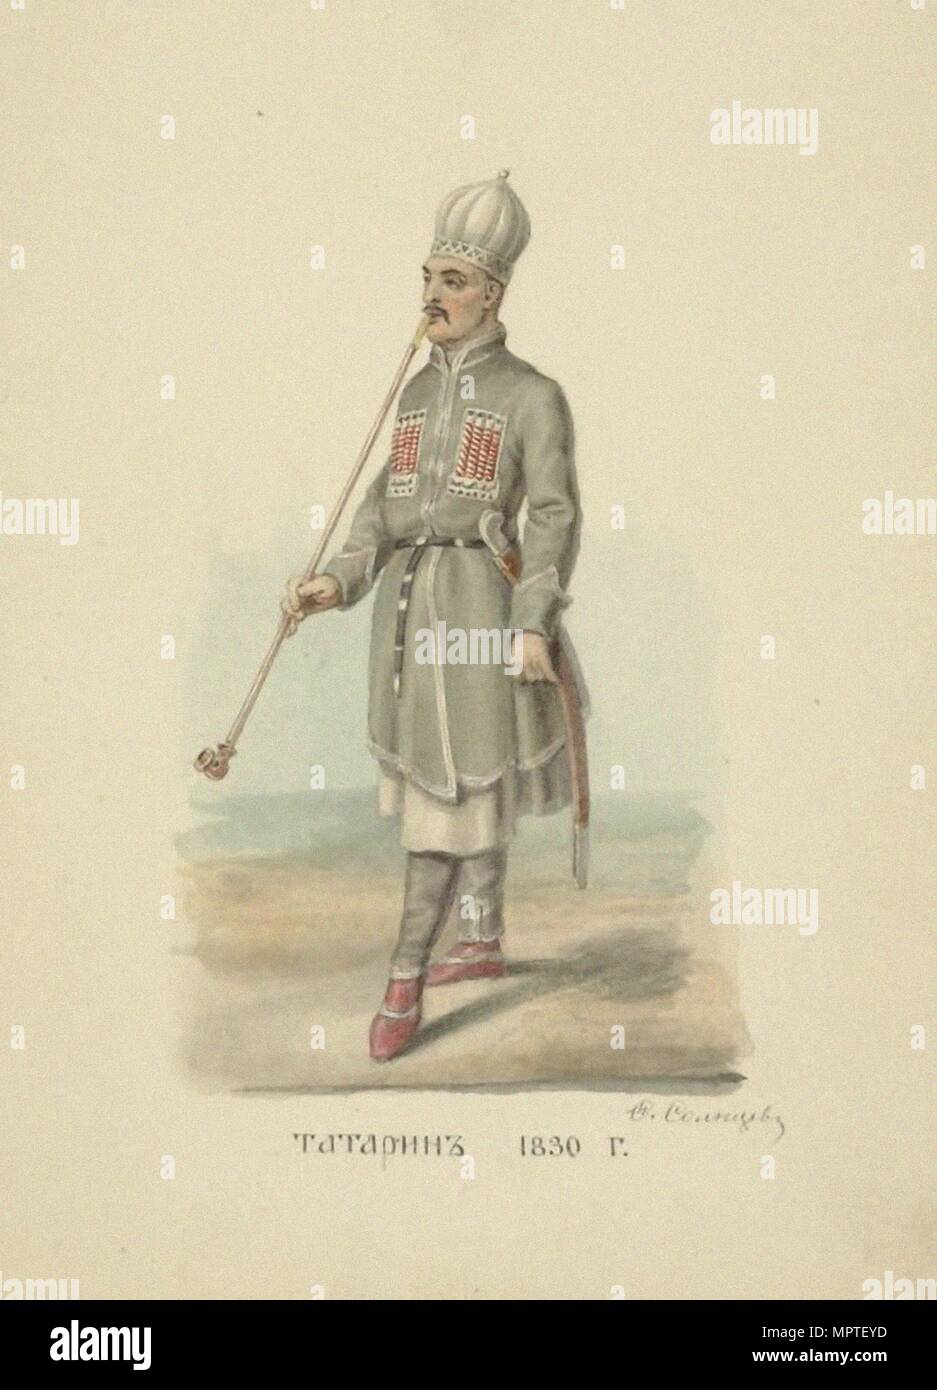 Tatar Man of 1830 (From the series Clothing of the Russian state), 1869. Stock Photo